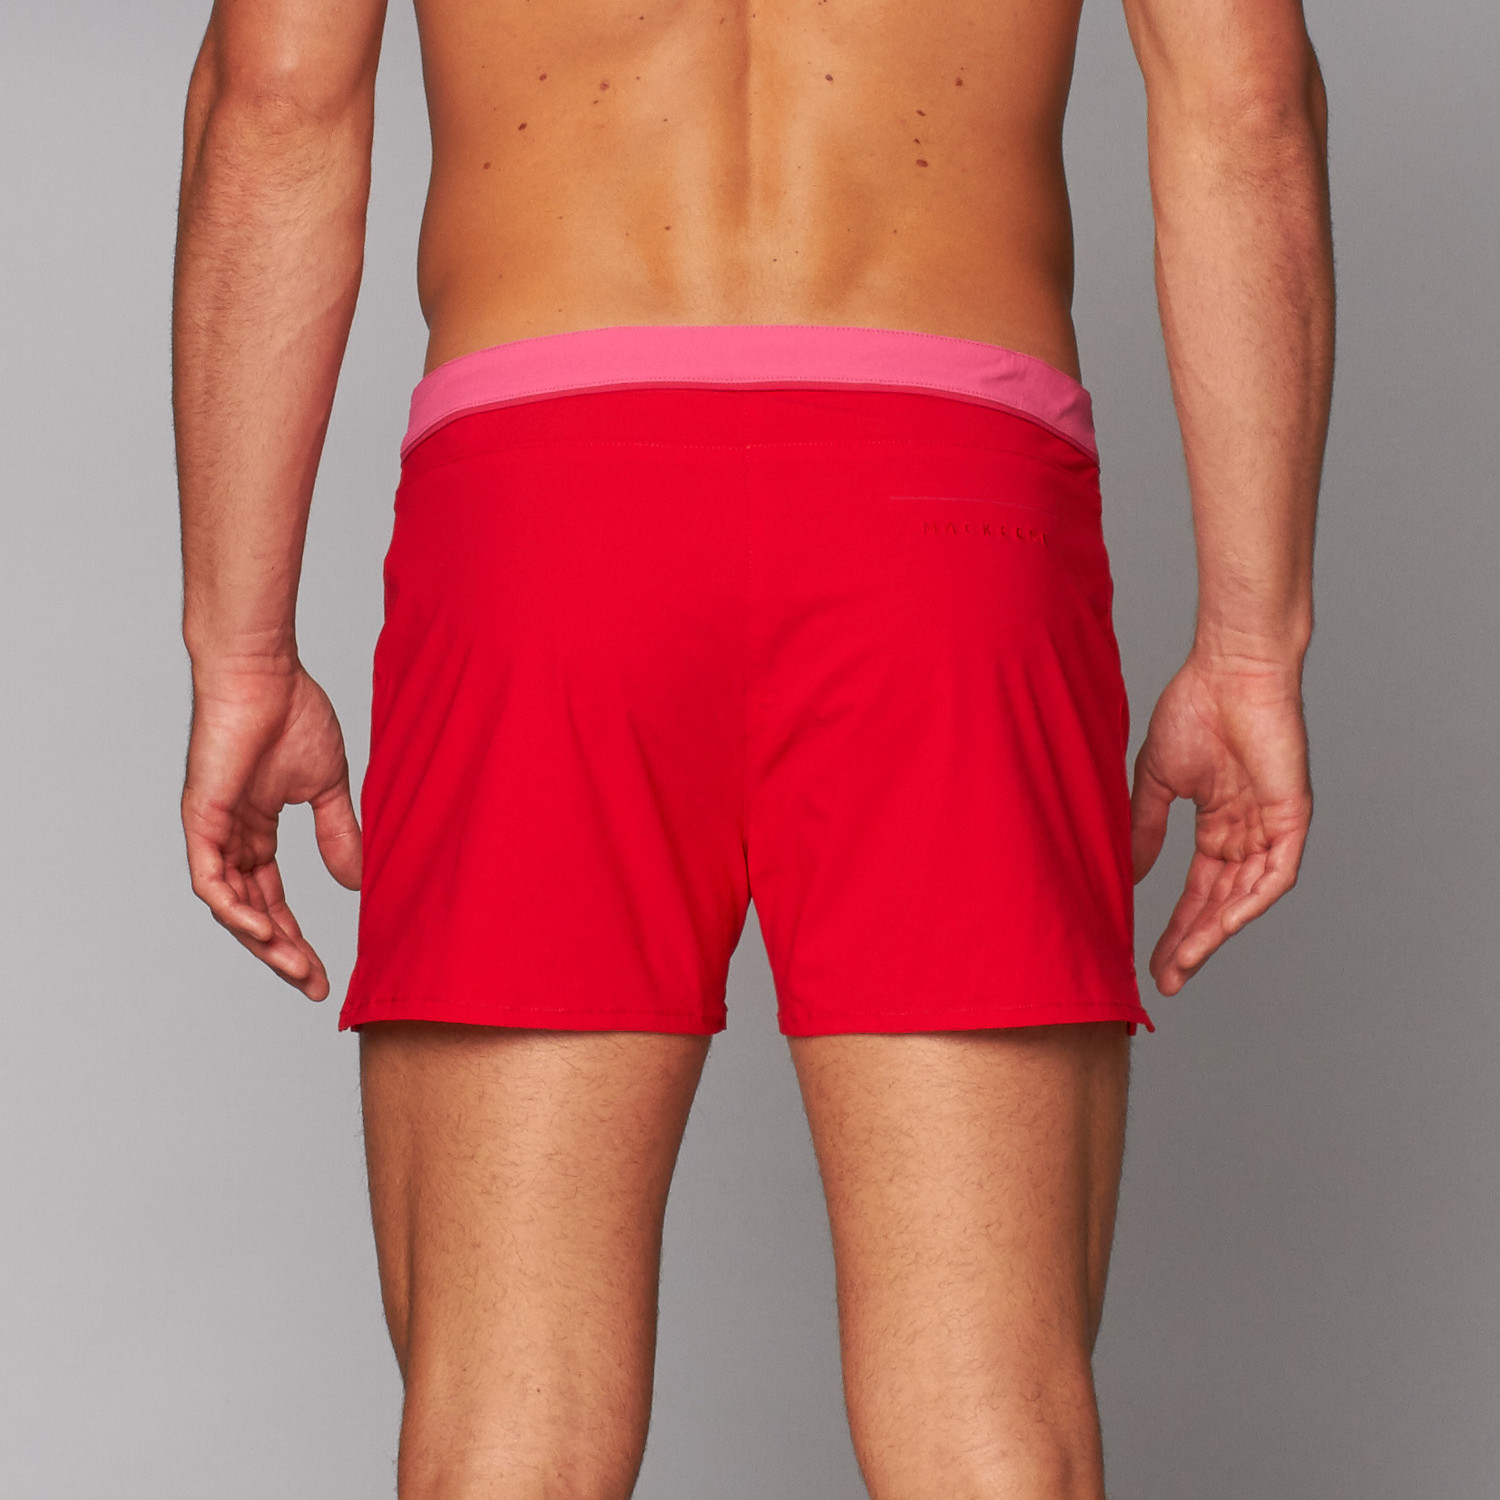 Vshort // Flame (Small // 33